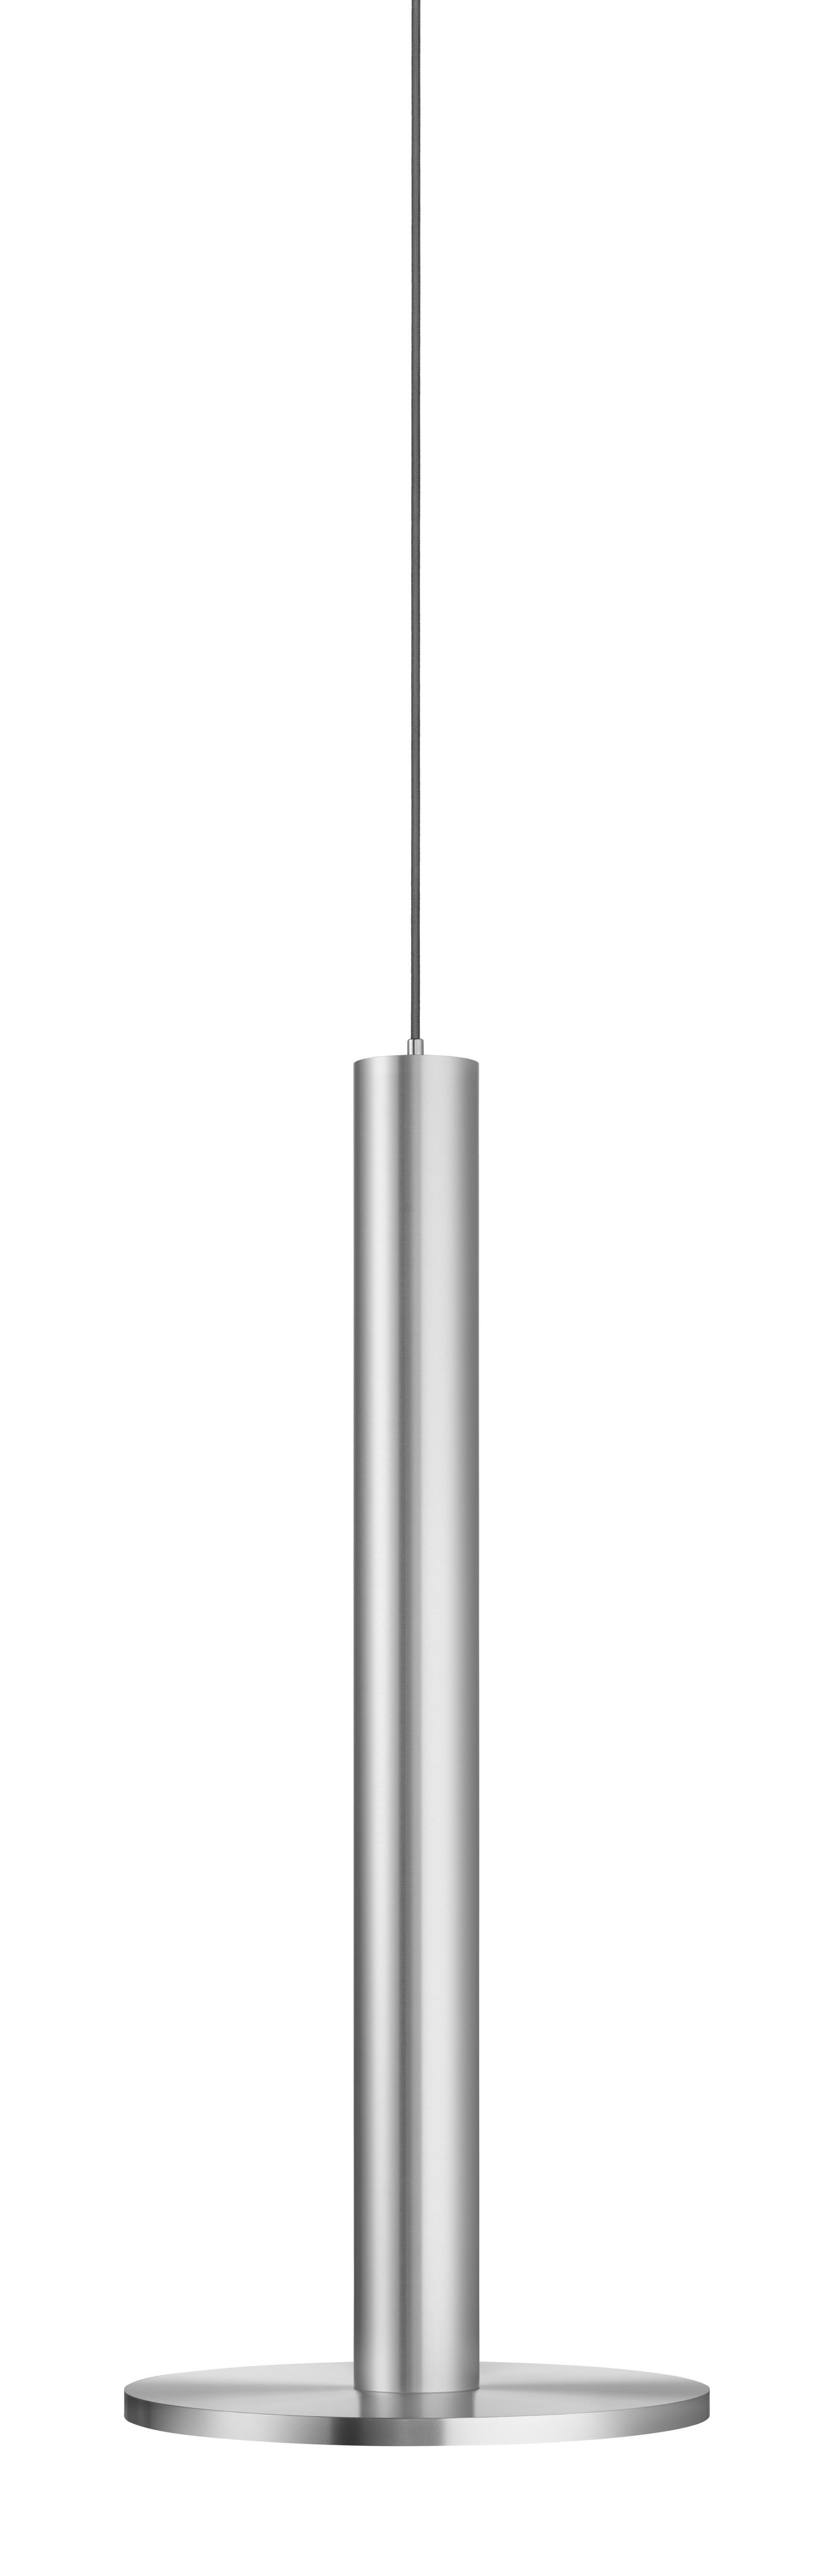 The Minimalist Cielo pendant series is expanding to include the stunning new Cielo XL, a taller and slimmer design offering premium machined aluminum finishes and boasting a warm and brilliant 1200 lumen output. Cielo XL is scaled perfectly for